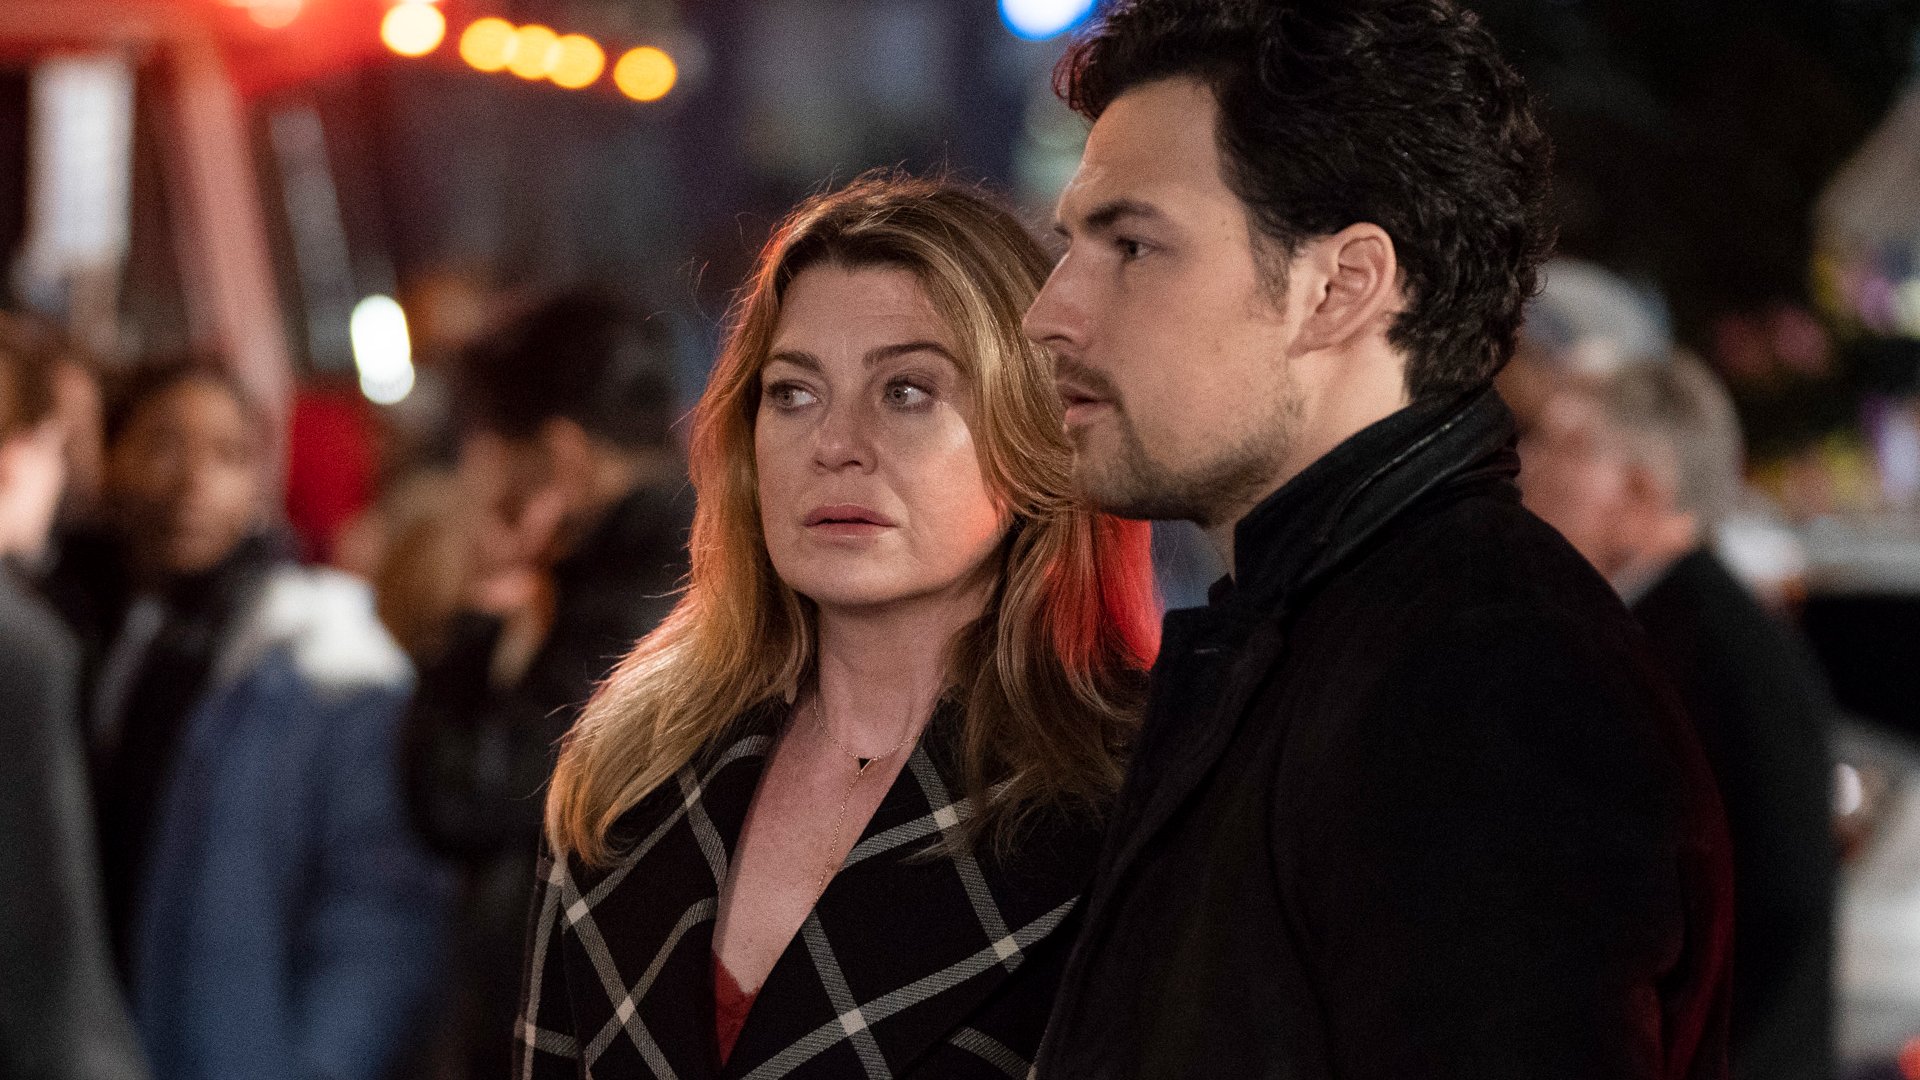 Ellen Pompeo as Meredith Grey and Giacomo Gianniotti as Andrew DeLuca looking confused in ‘Grey’s Anatomy’